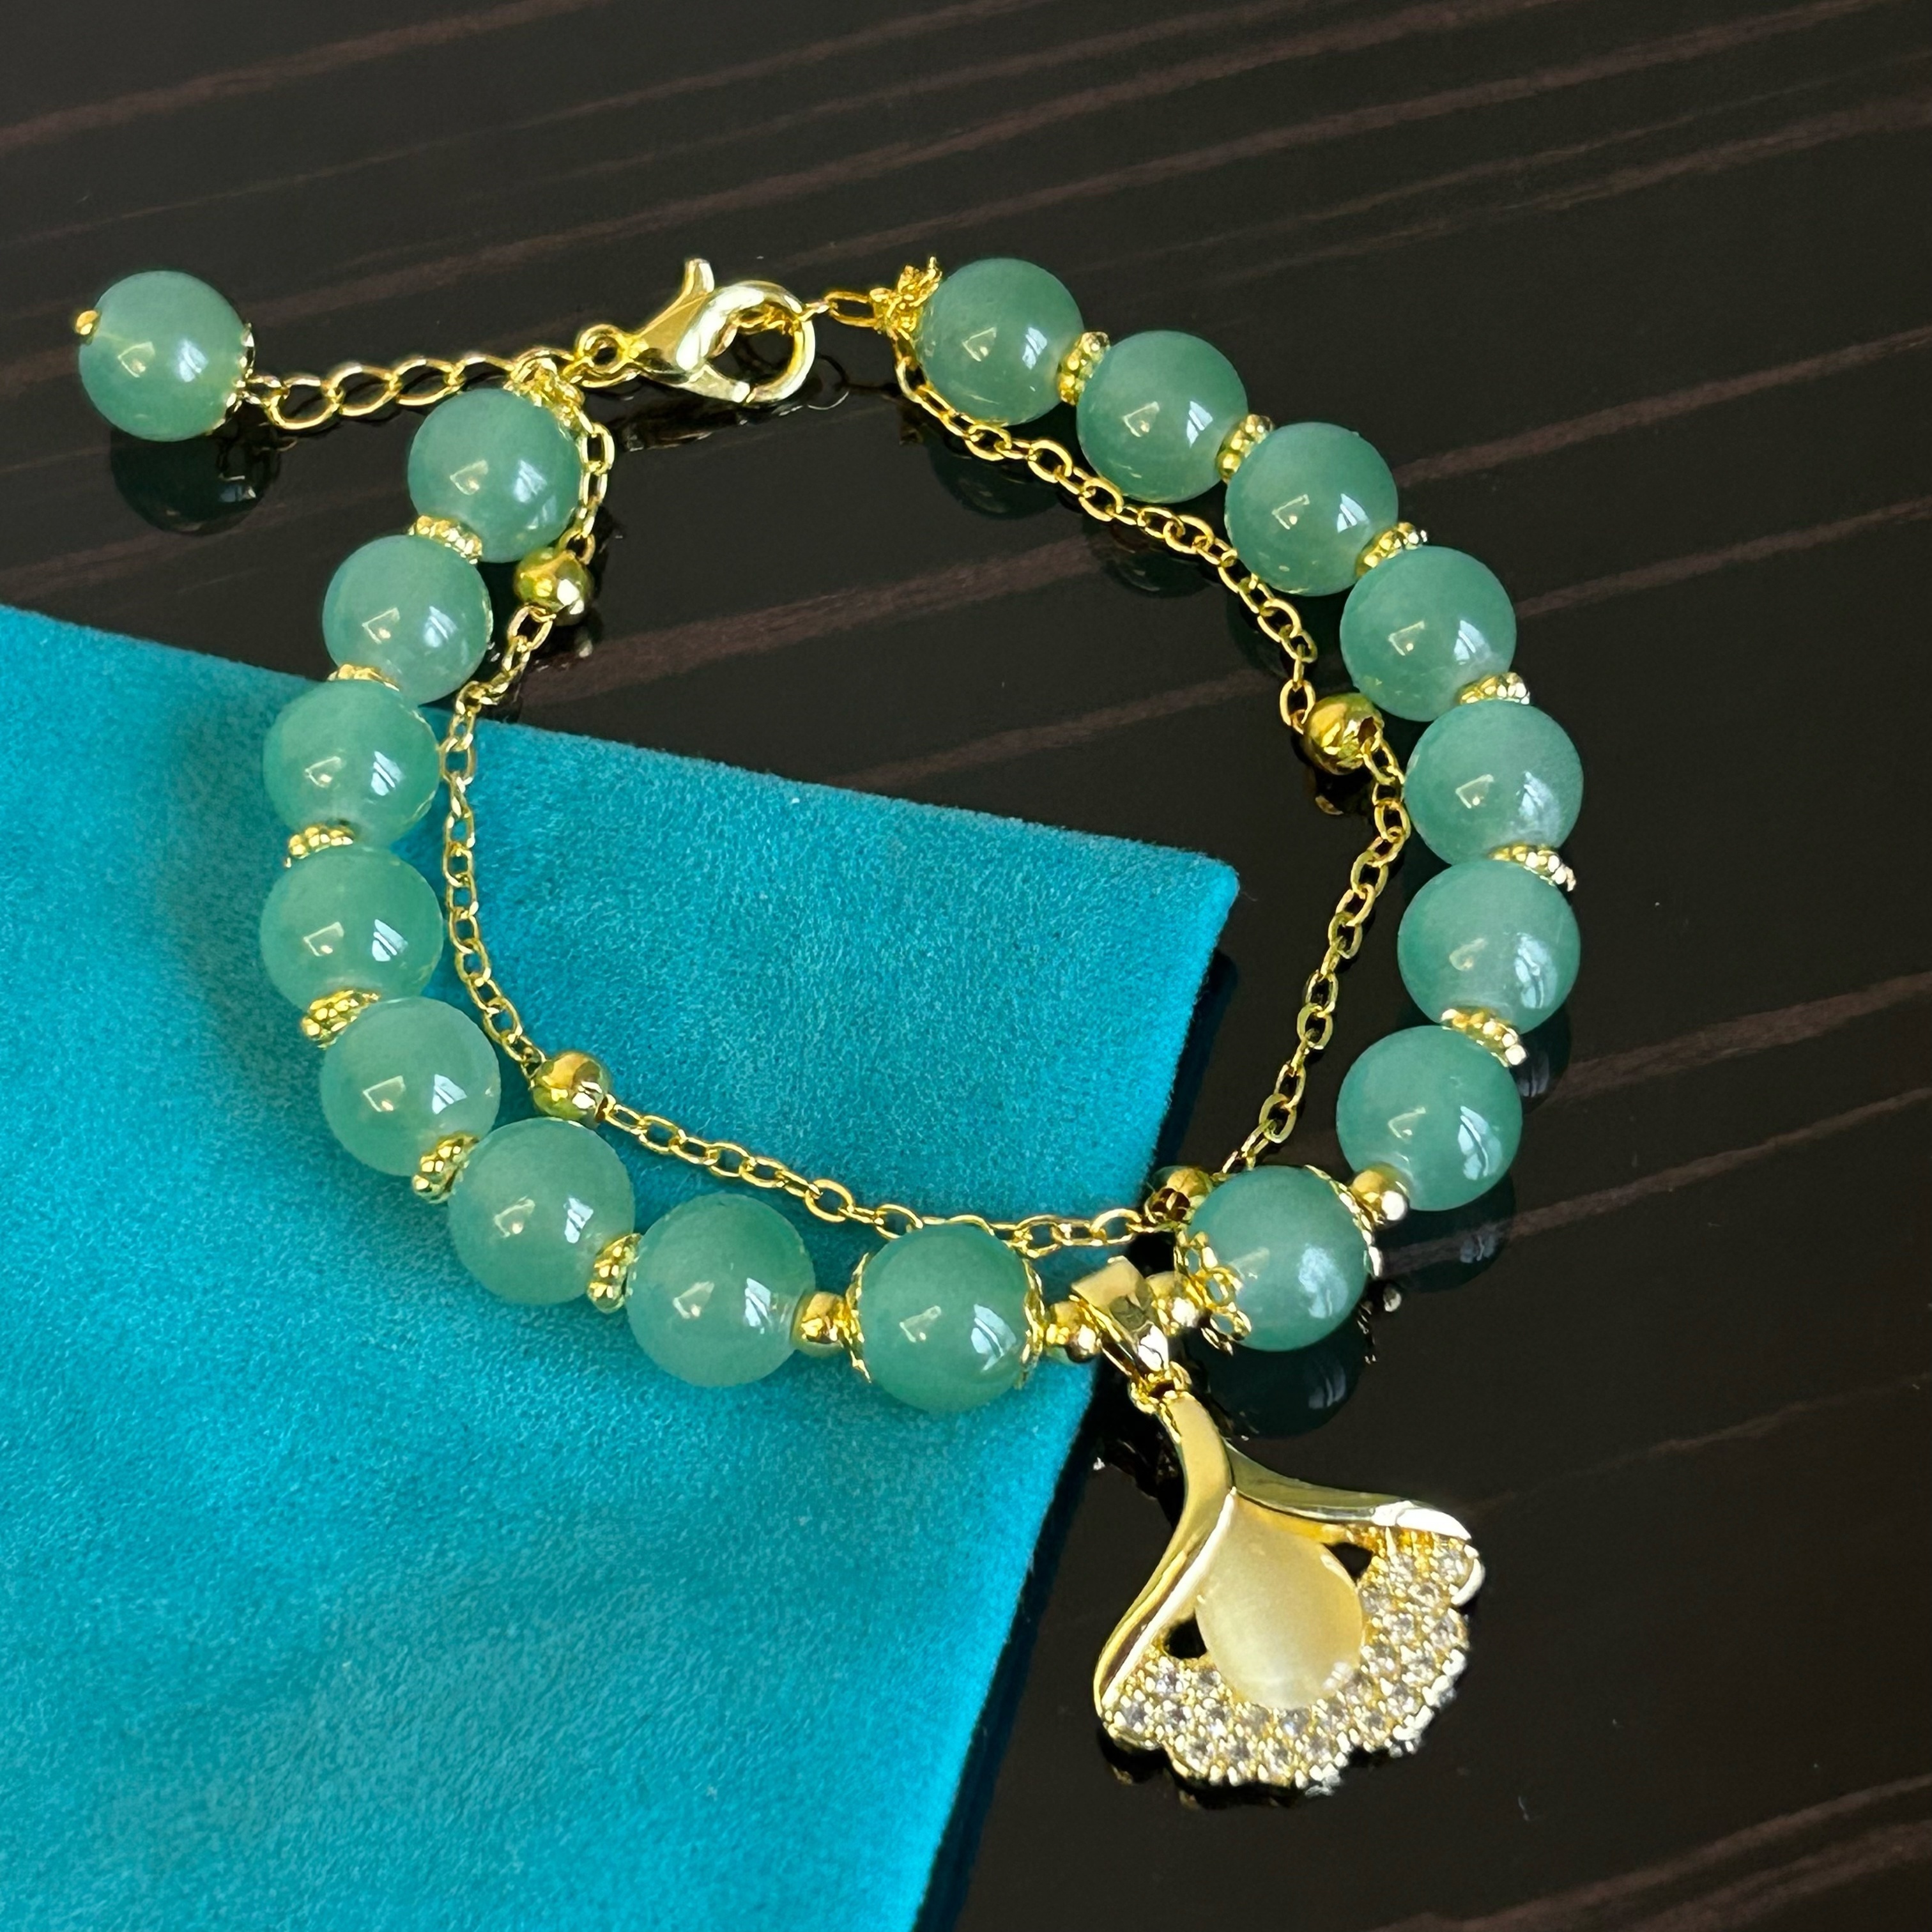 1 Pc Green Jade Bracelet with Ginkgo Leaf: Good Gift for Girlfriend or Mother